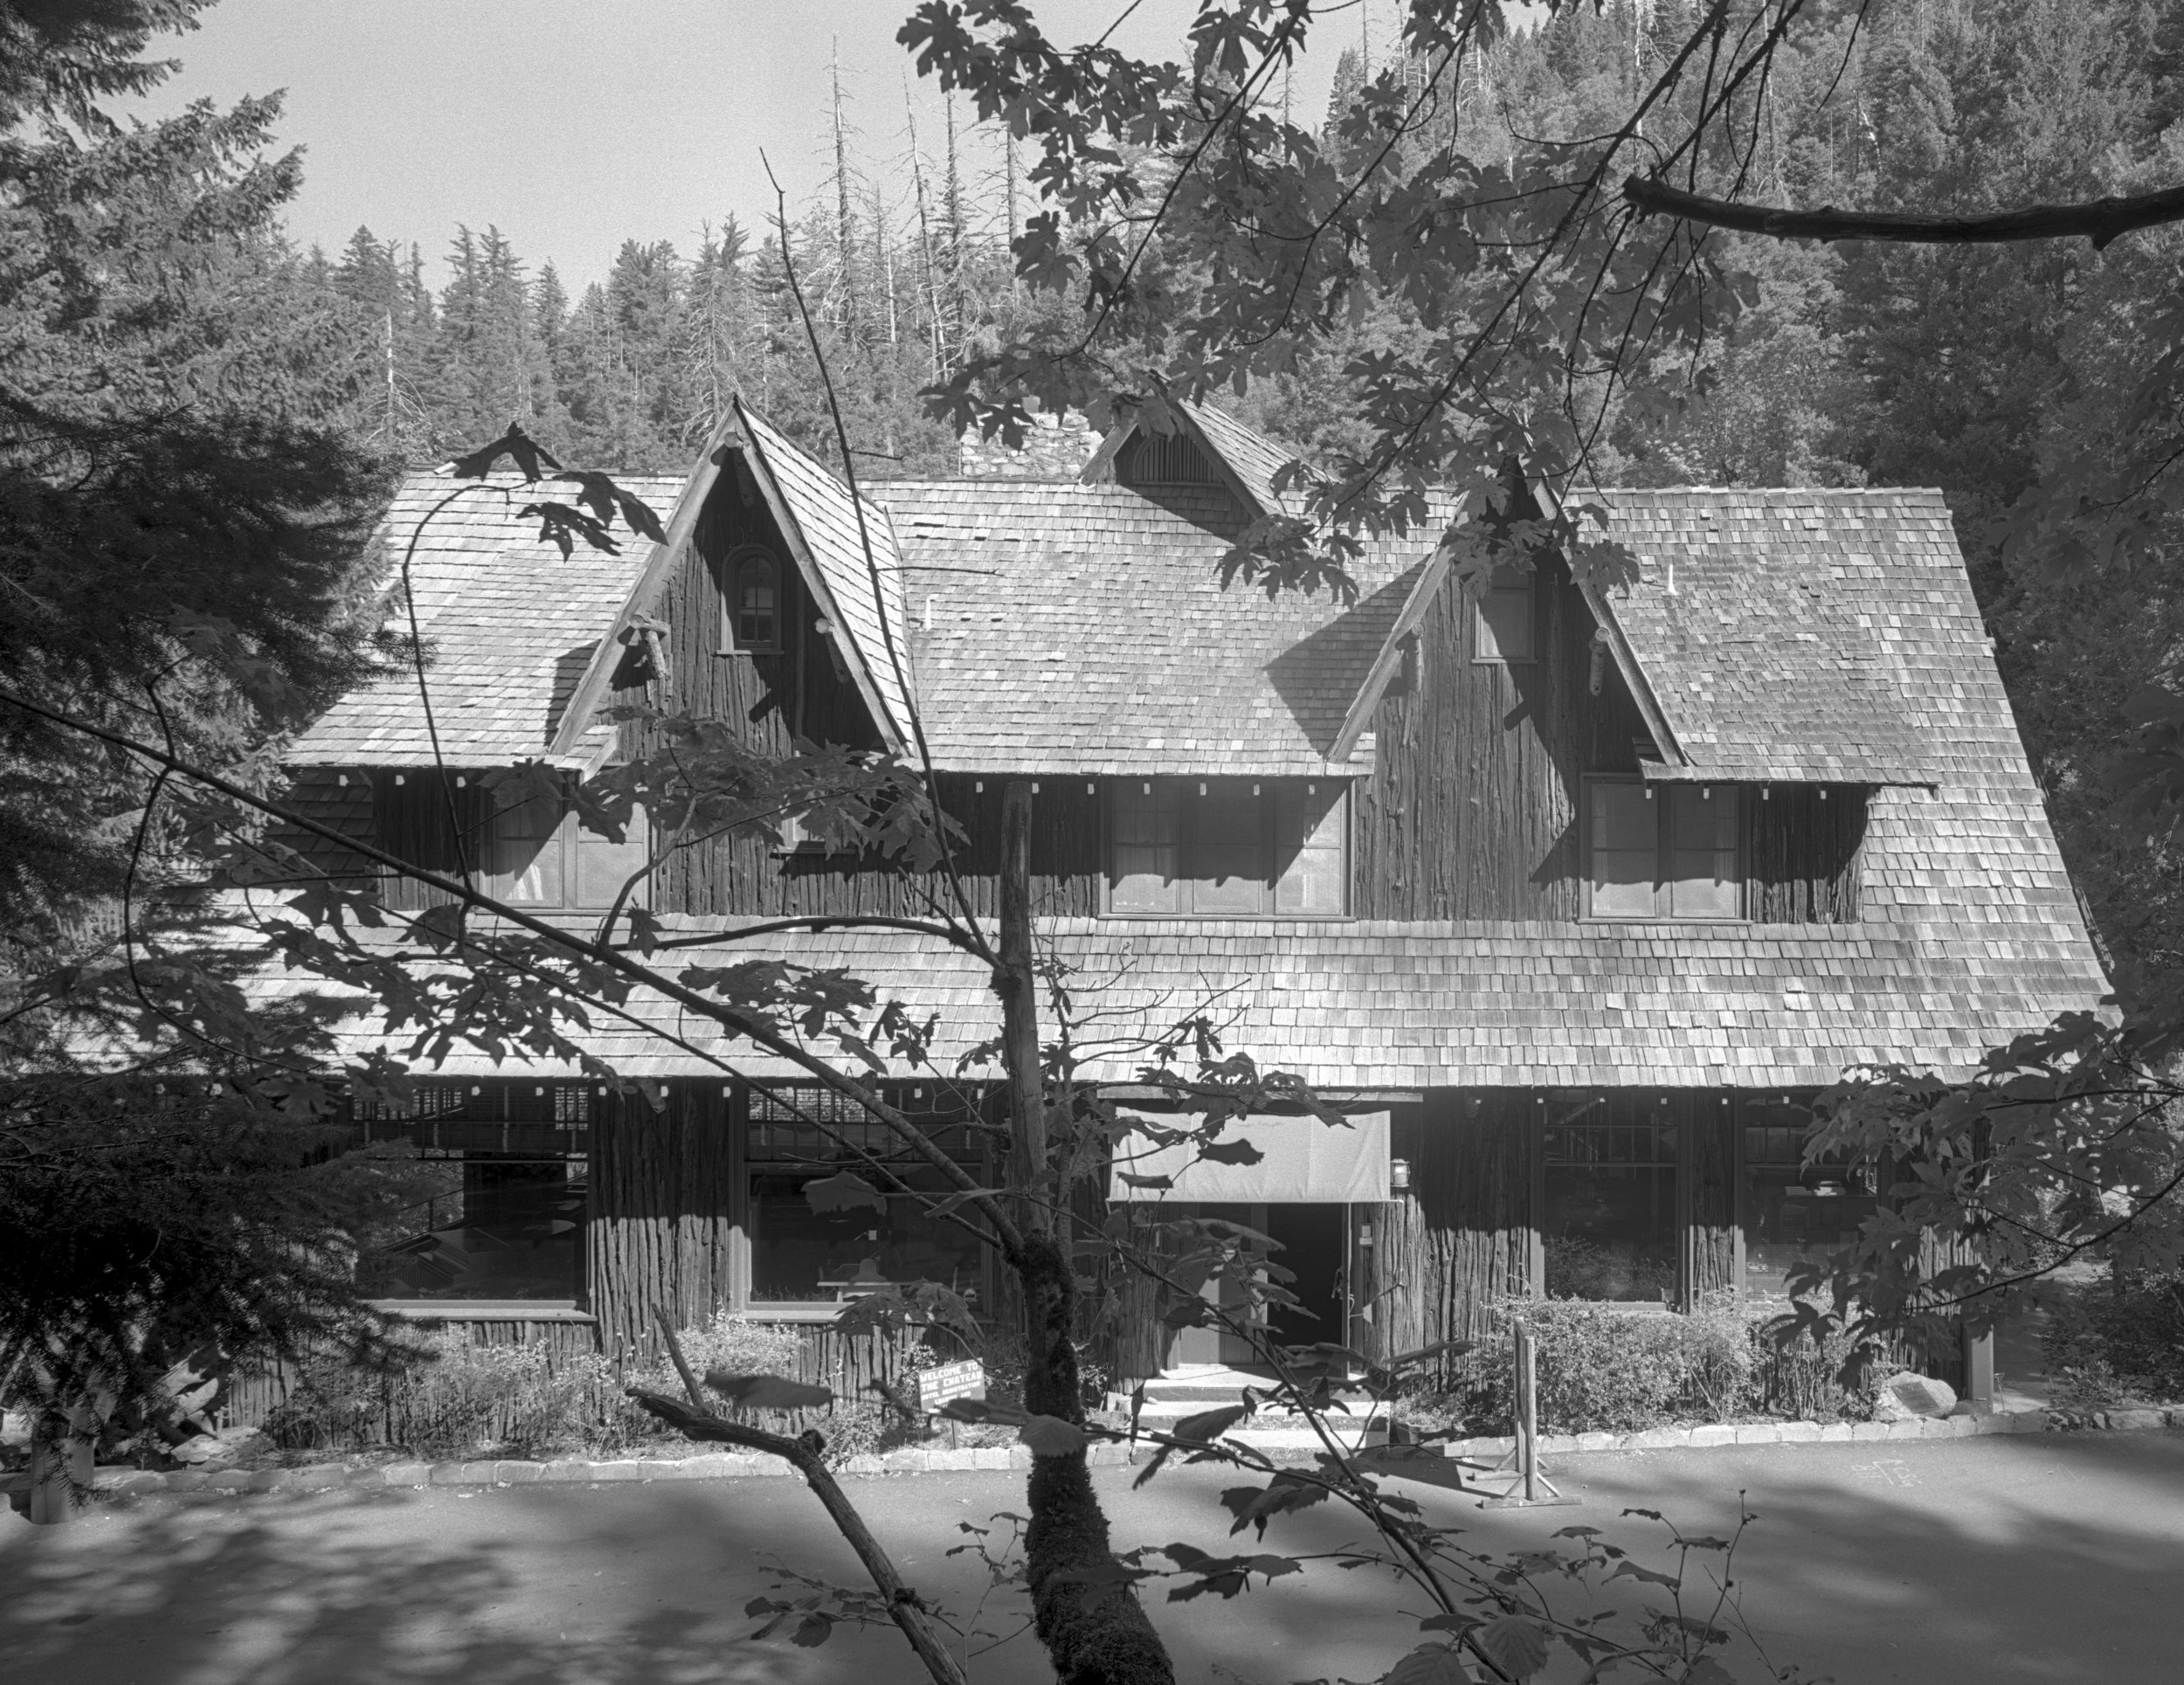 Chateau at the Oregon Caves (1934)